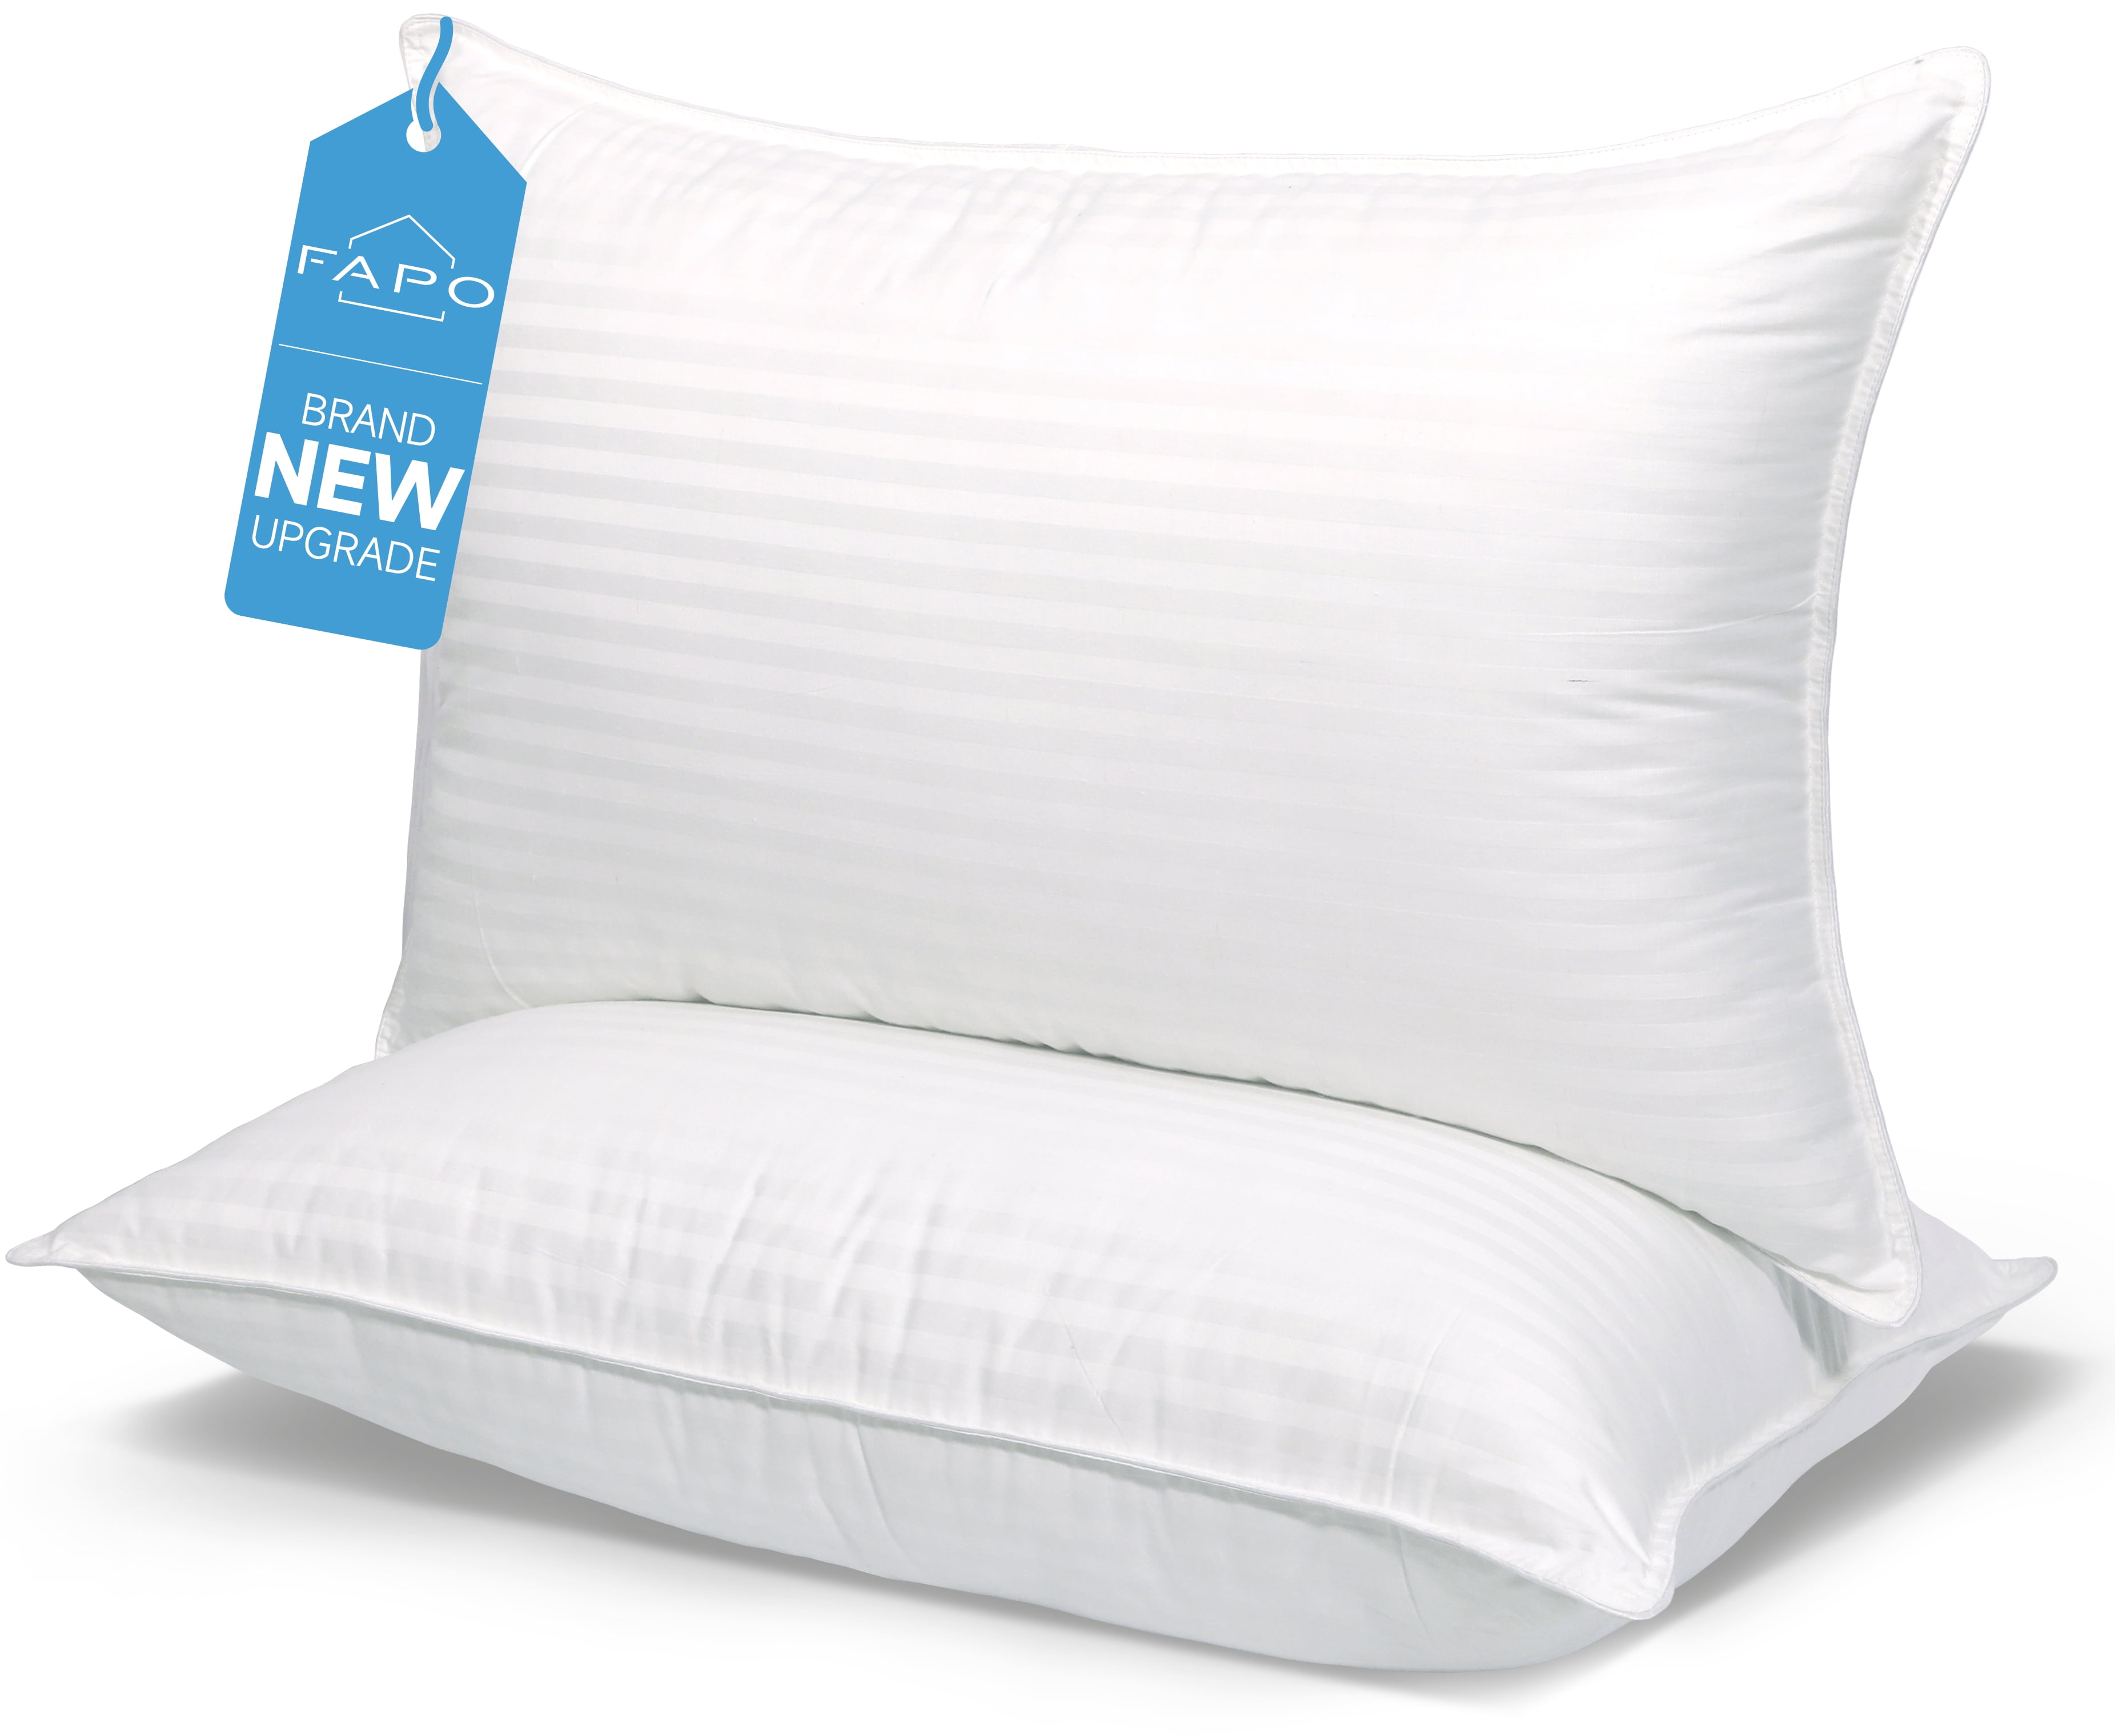 ROYAL THERAPY King-Size Hotel Pillows, 2-Pack Premium Down